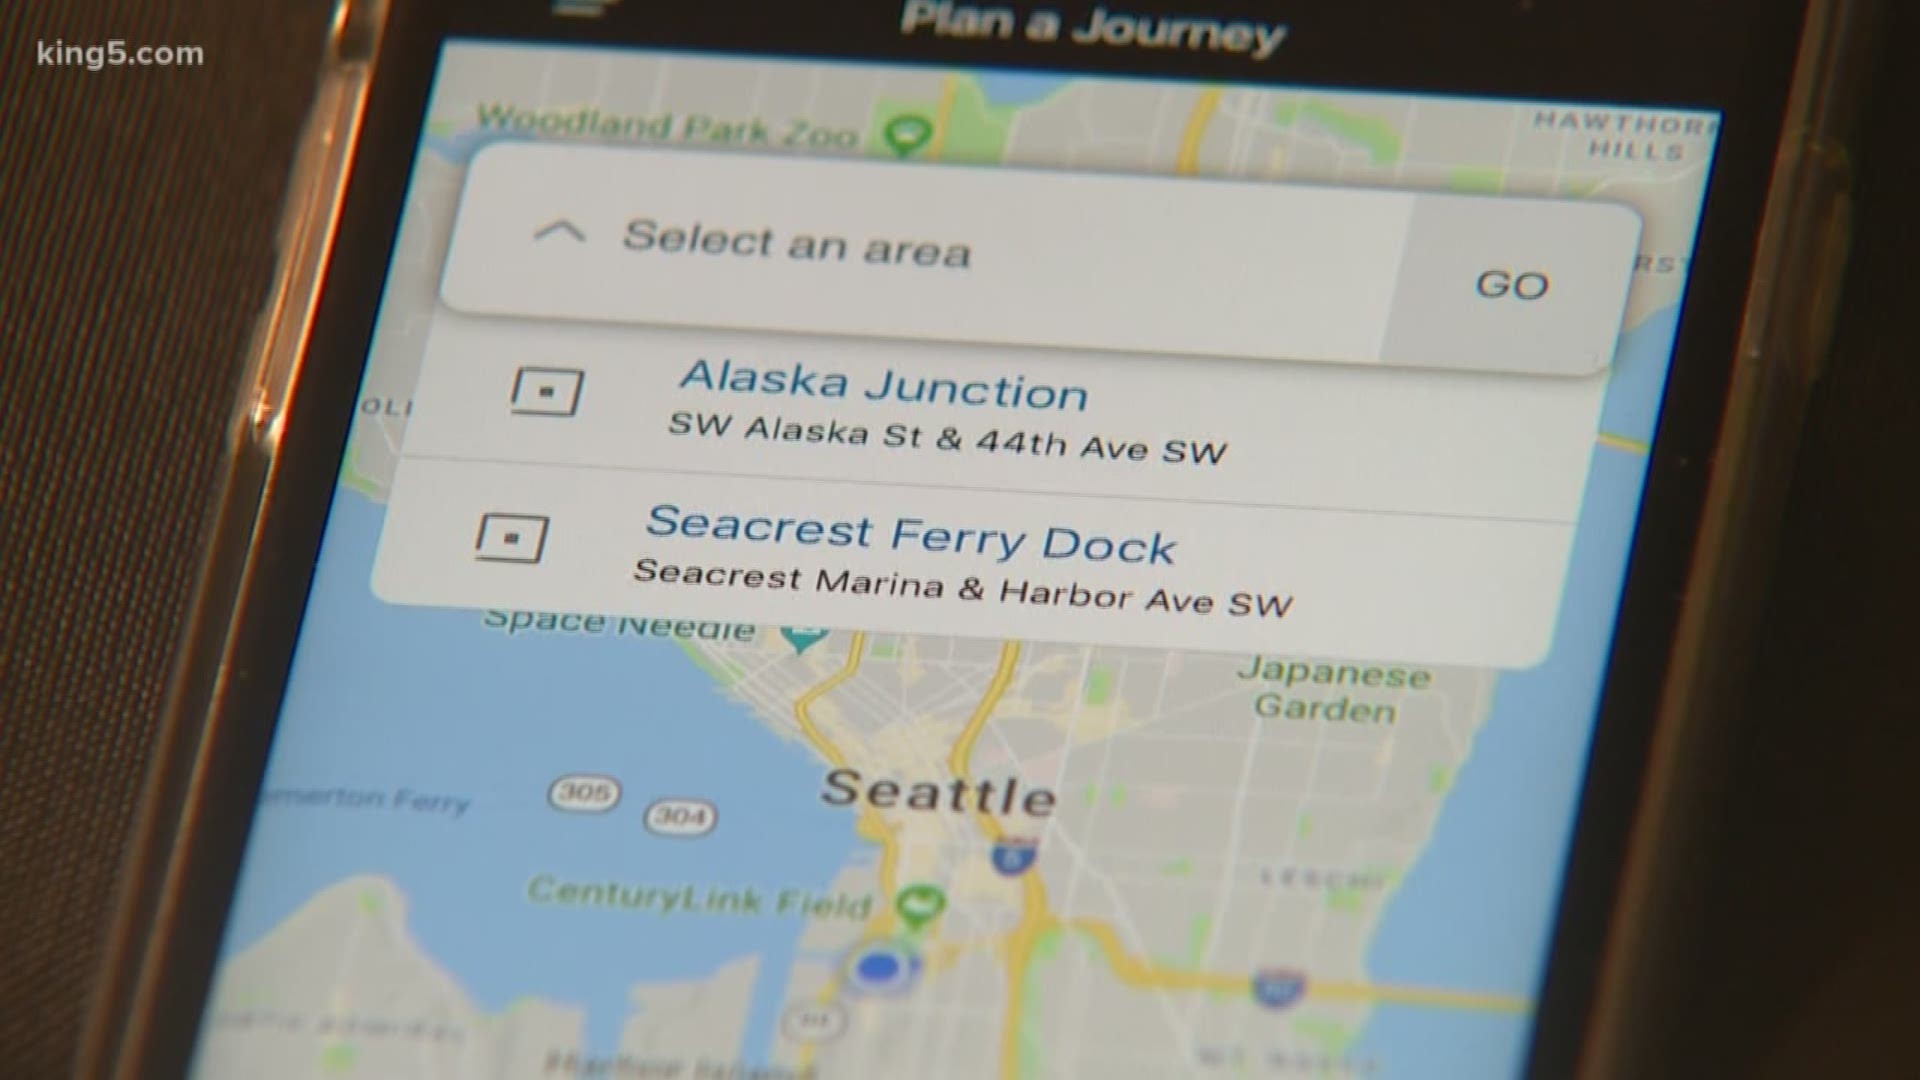 With the Alaskan Way Viaduct closure looming, several apps can help drivers alleviate some of the stress of navigating the city.